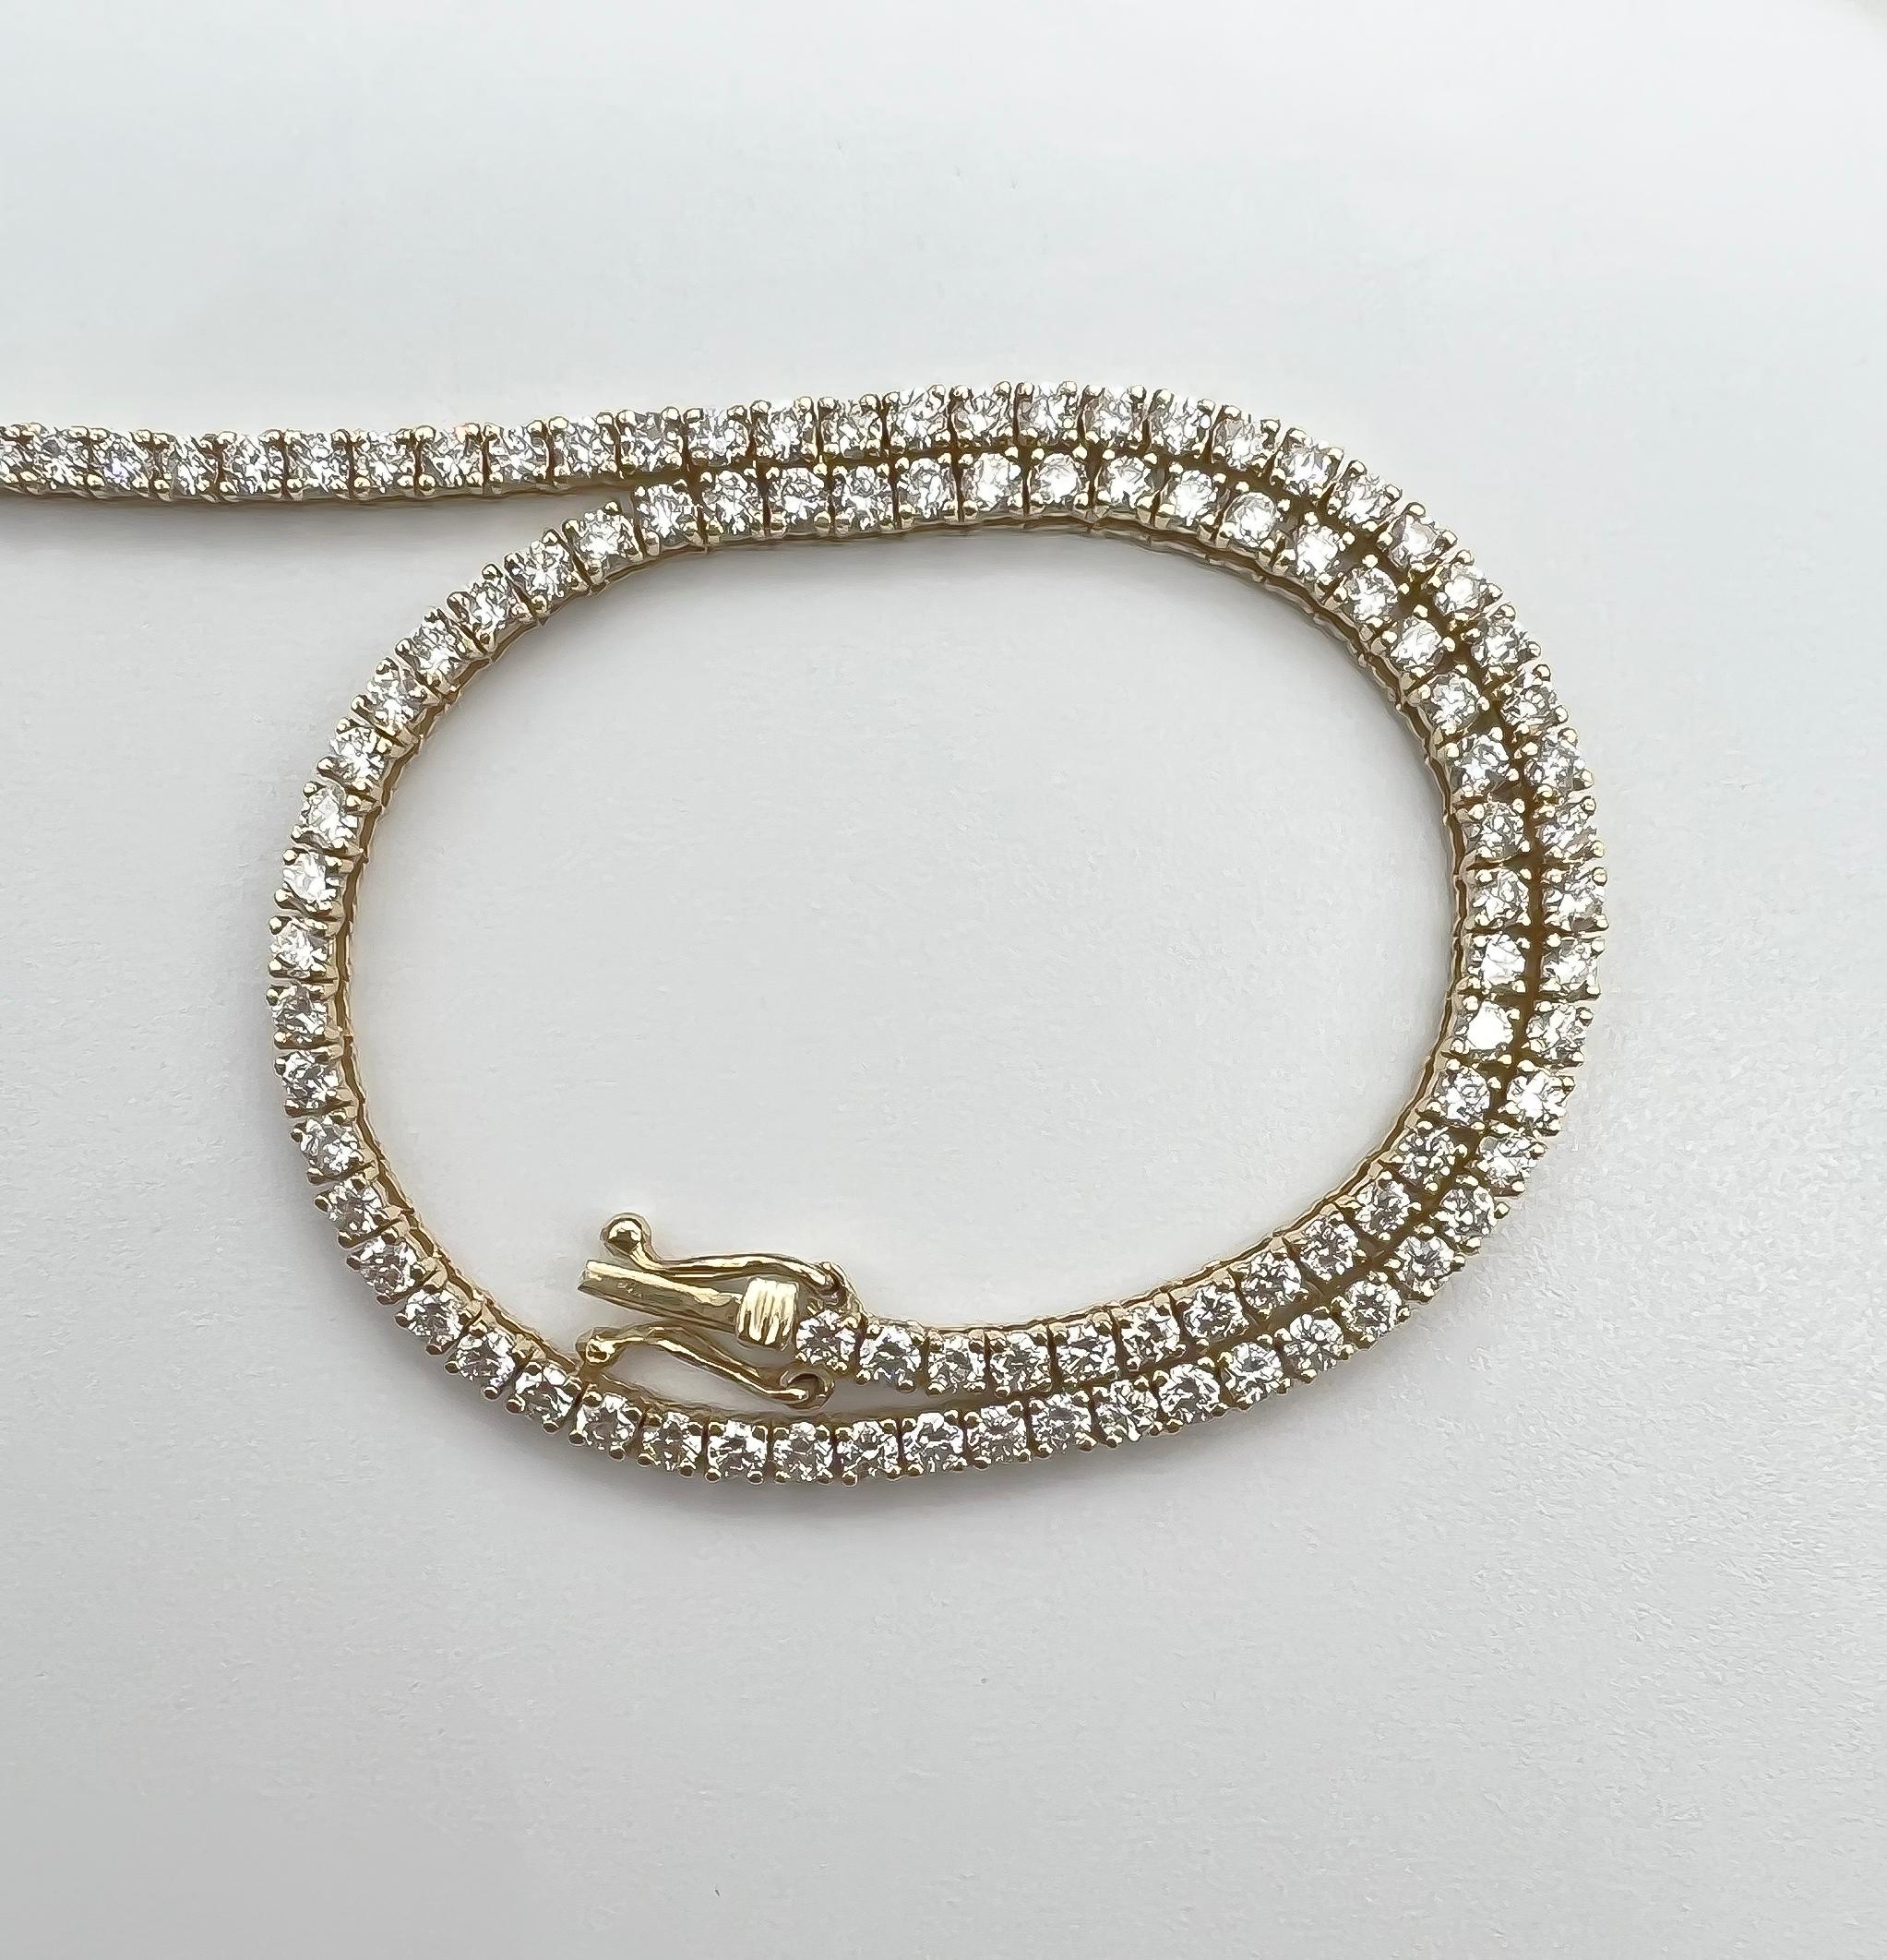 4.17 Carat Diamond Tennis Necklace with Round Diamonds in Yellow Gold Chain In New Condition For Sale In New York, NY